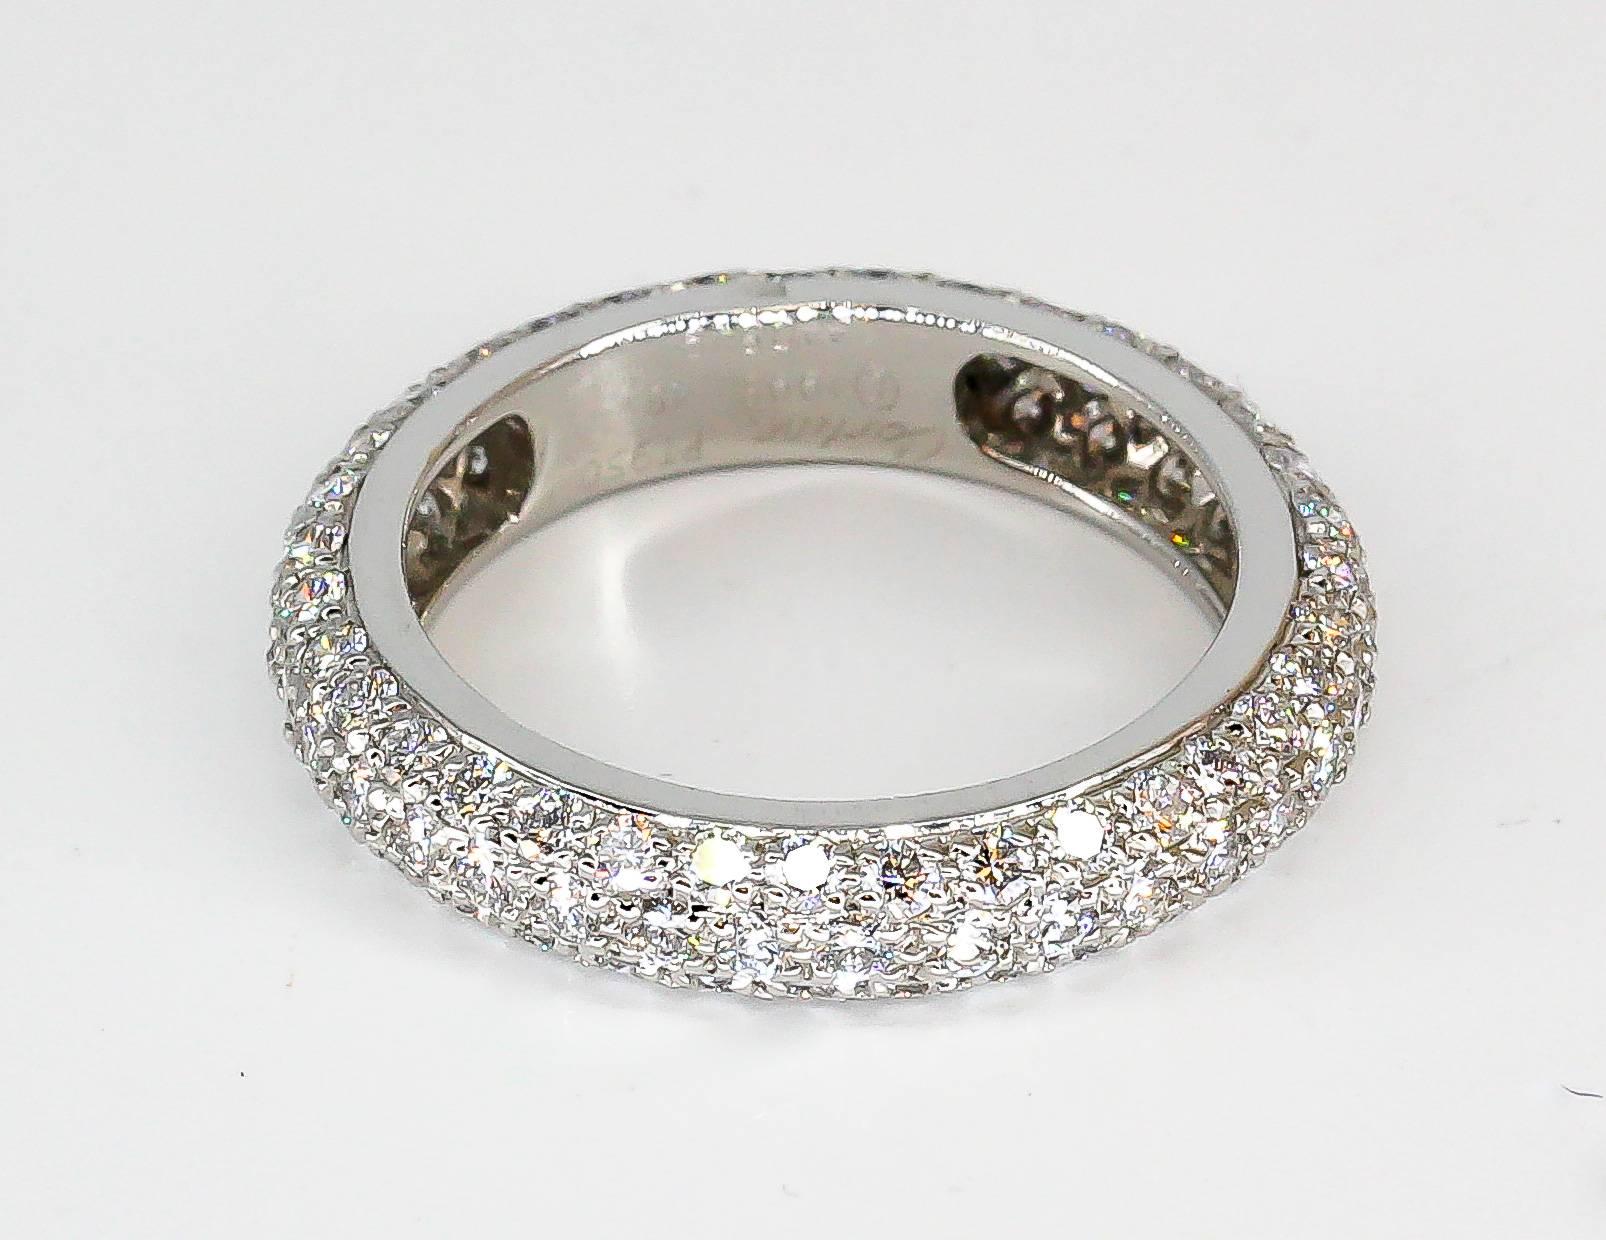 Elegant 3 row pave diamond and platinum band by Cartier. It features high grade round brilliant cut diamonds in 3 rows. Approx. size 4.5-5 (European size 48)

Hallmarks: Cartier, 1995, PT 950, 48, reference numbers, maker's mark, platinum assay mark.